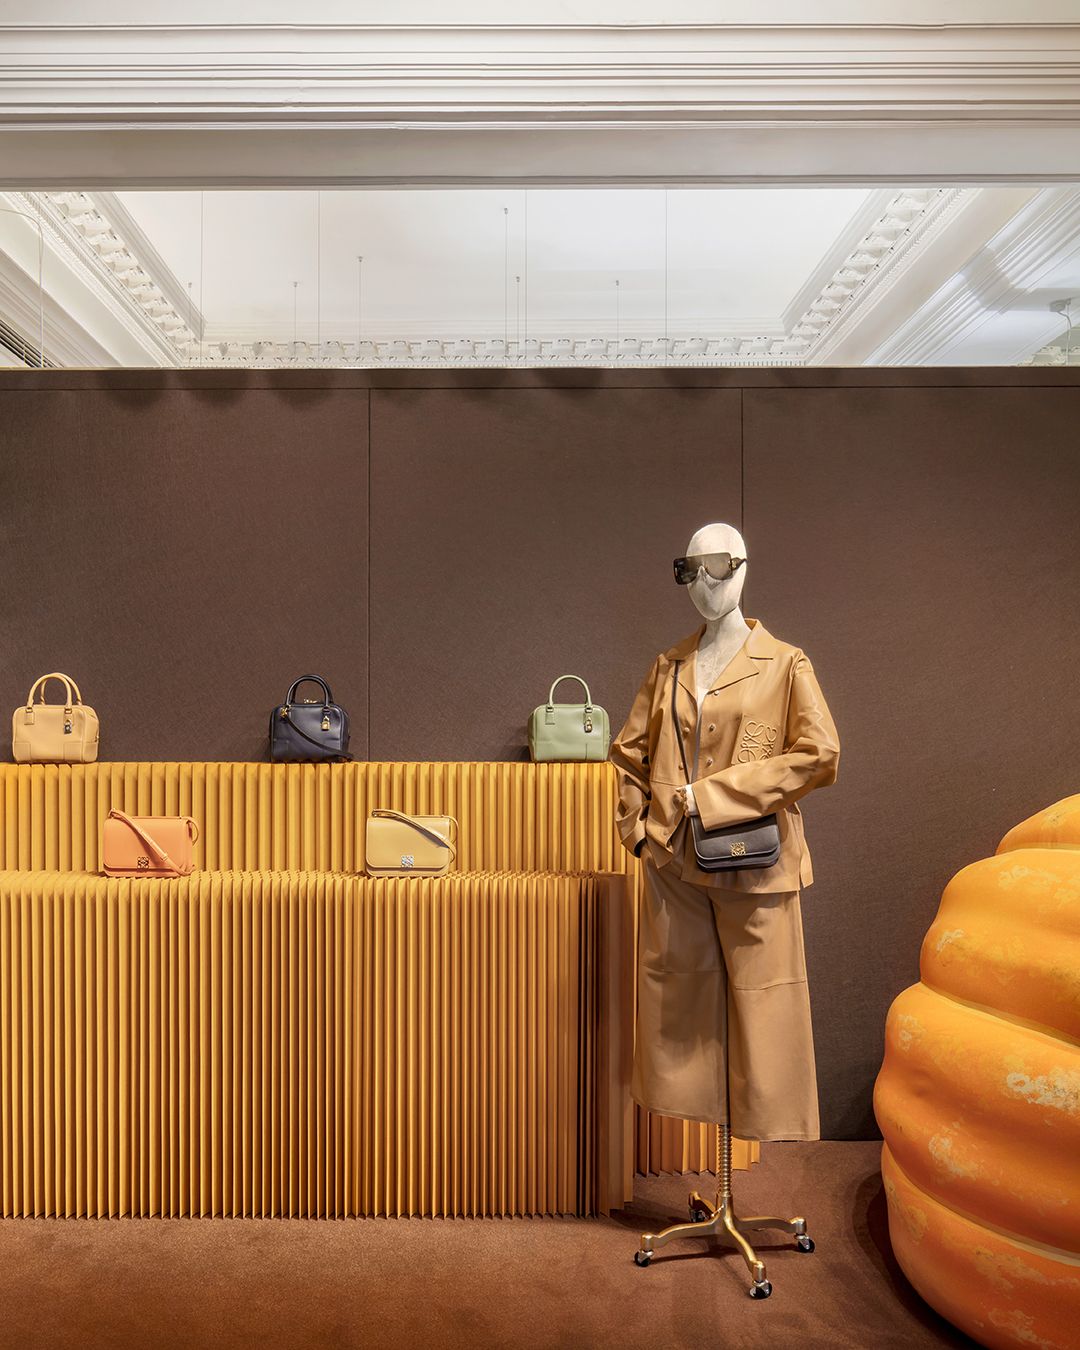 Loewe Launches Pop-Up At Harrods